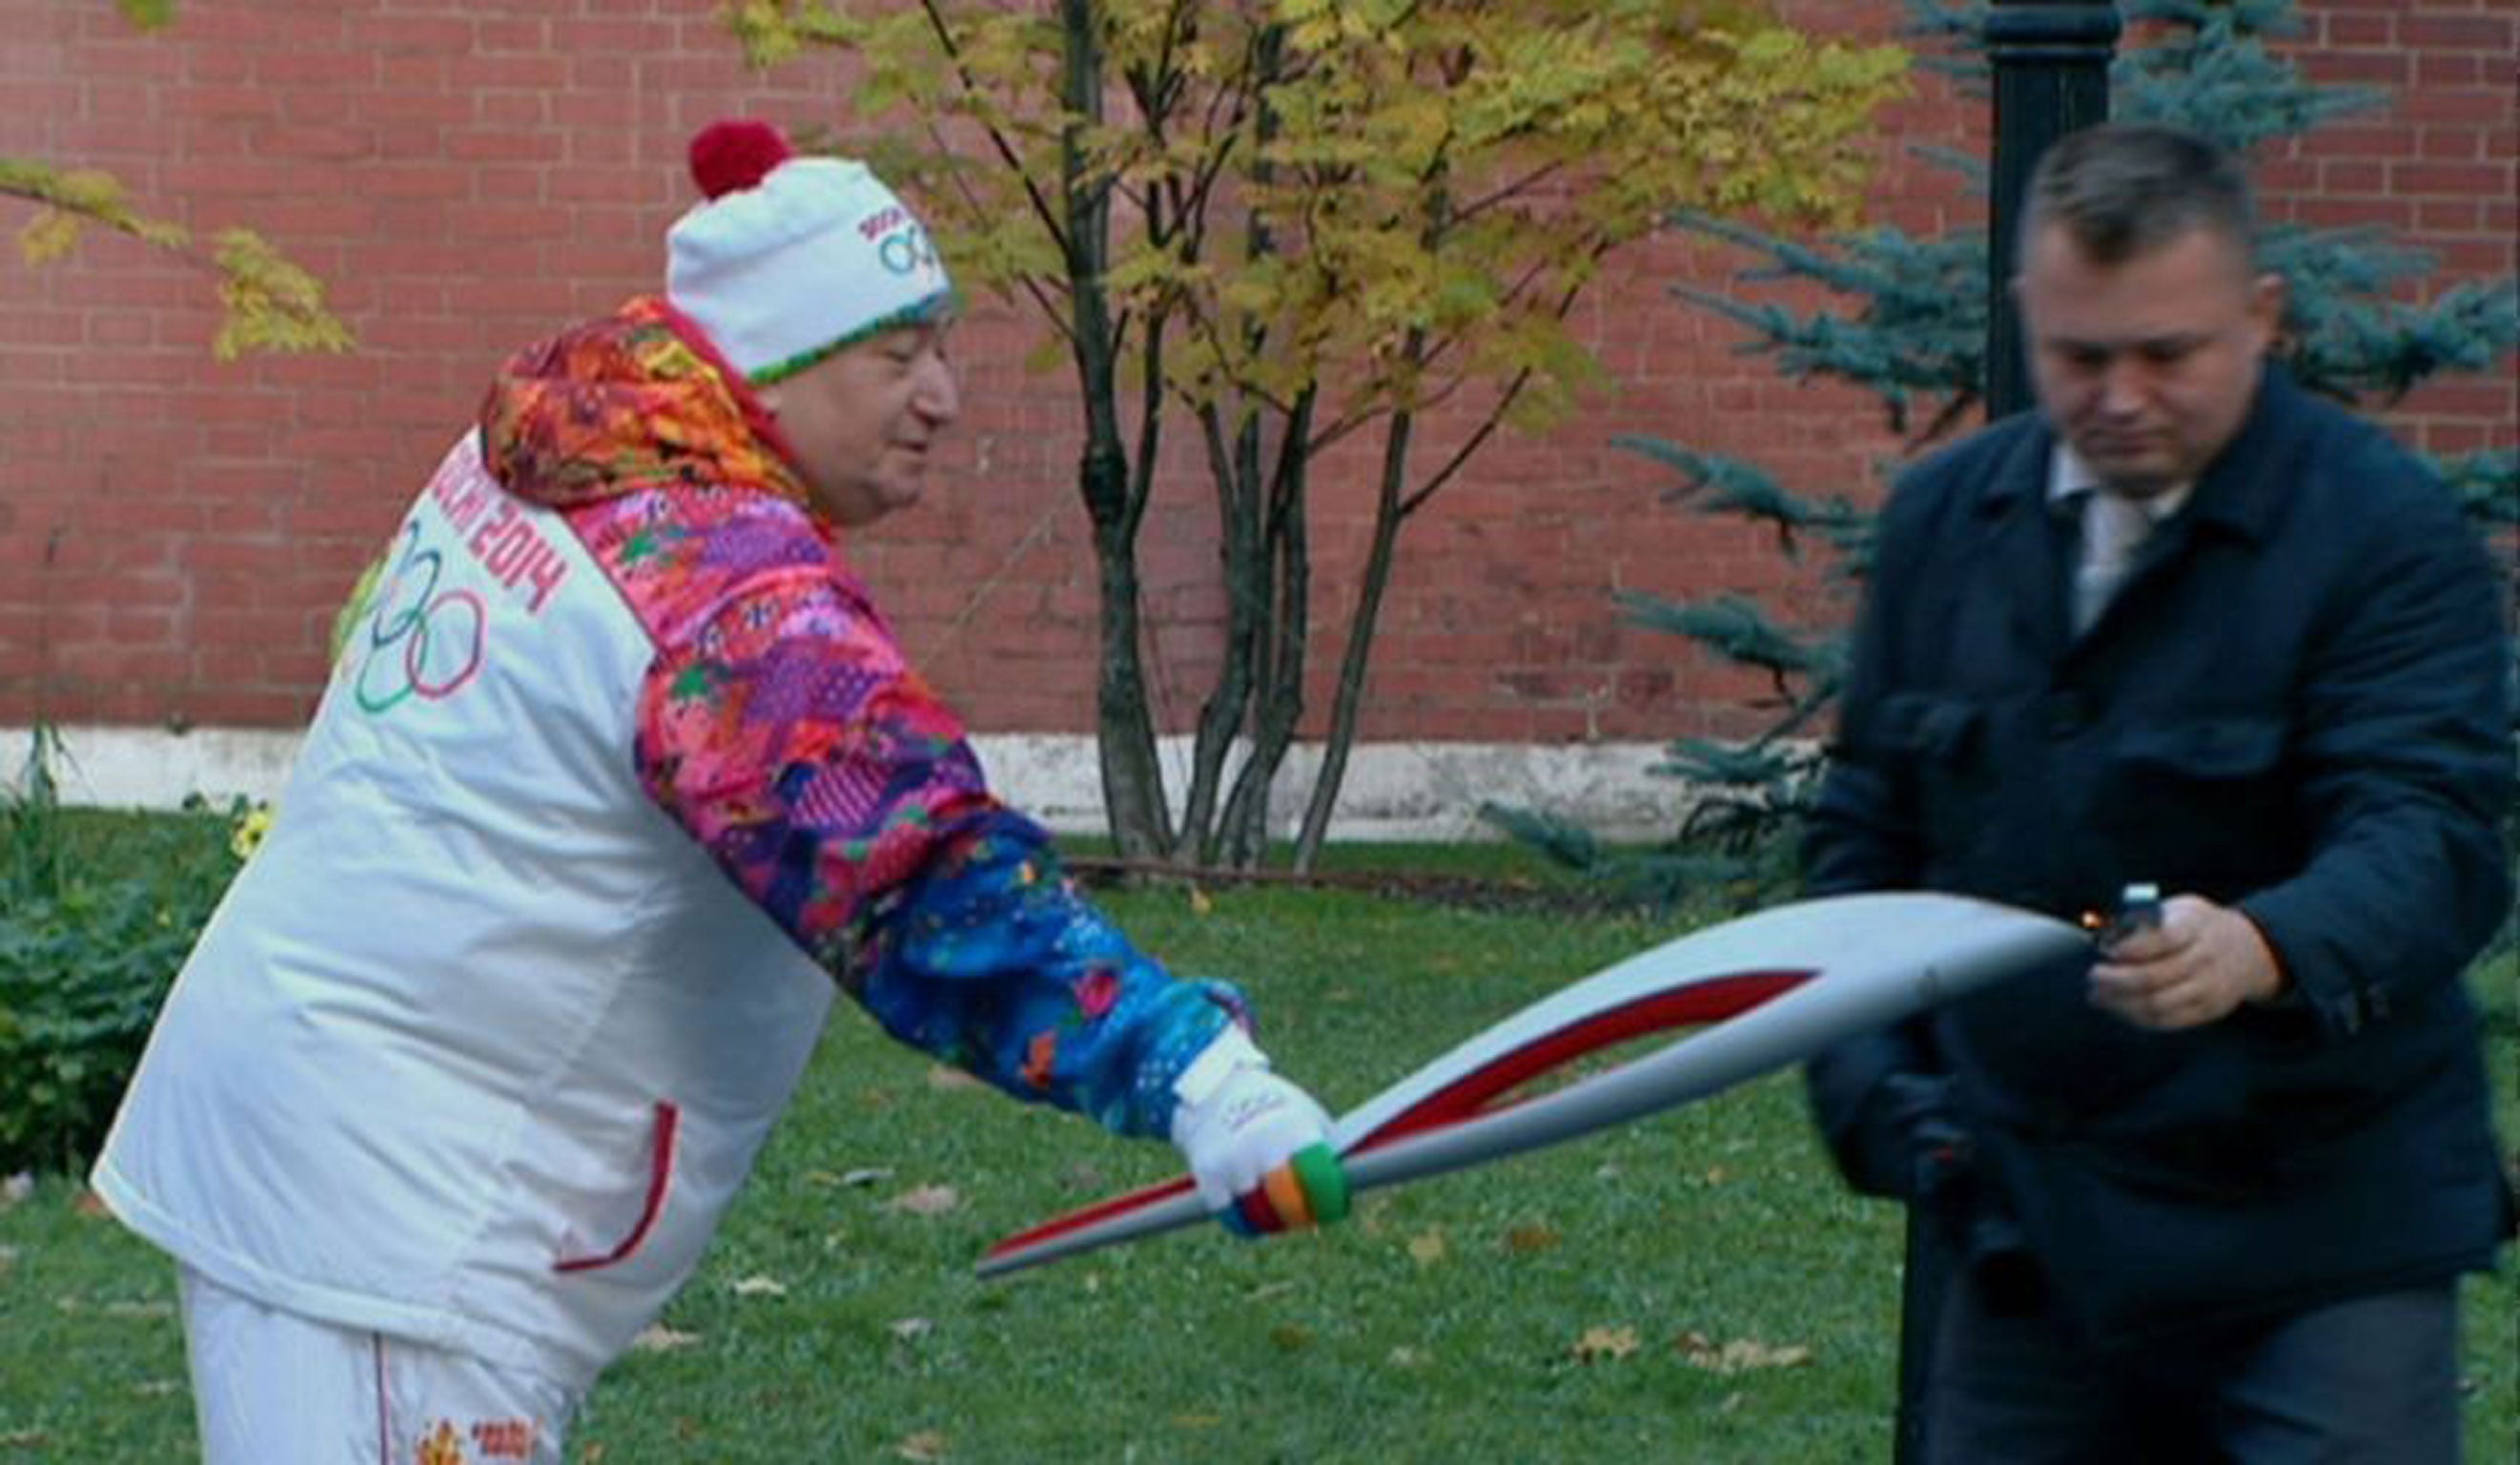 In this frame grab provided by APTN, a security officer lights an Olympic torch for former swimming champion Savarsh Karapetyan after the flame was blown out